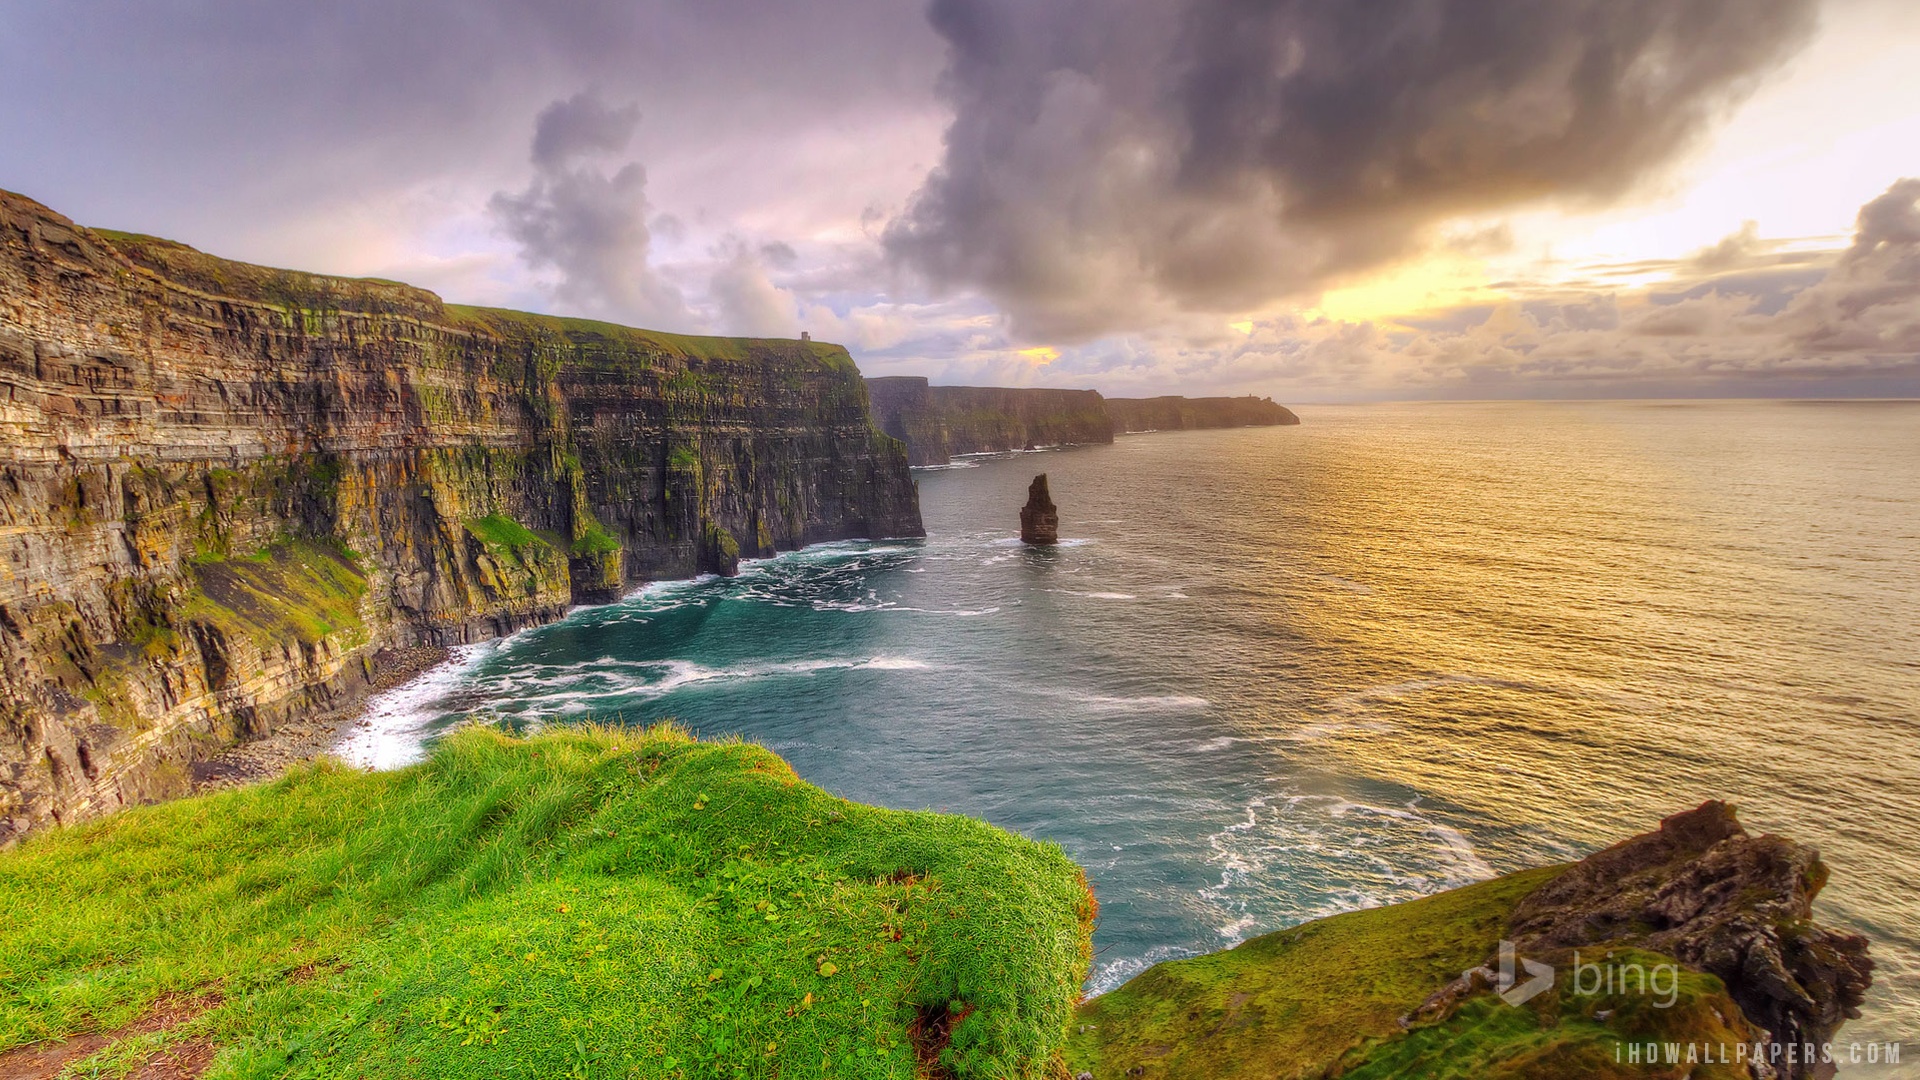  Moher at sunset County Clare Ireland HD Wallpaper   iHD Wallpapers 1920x1080